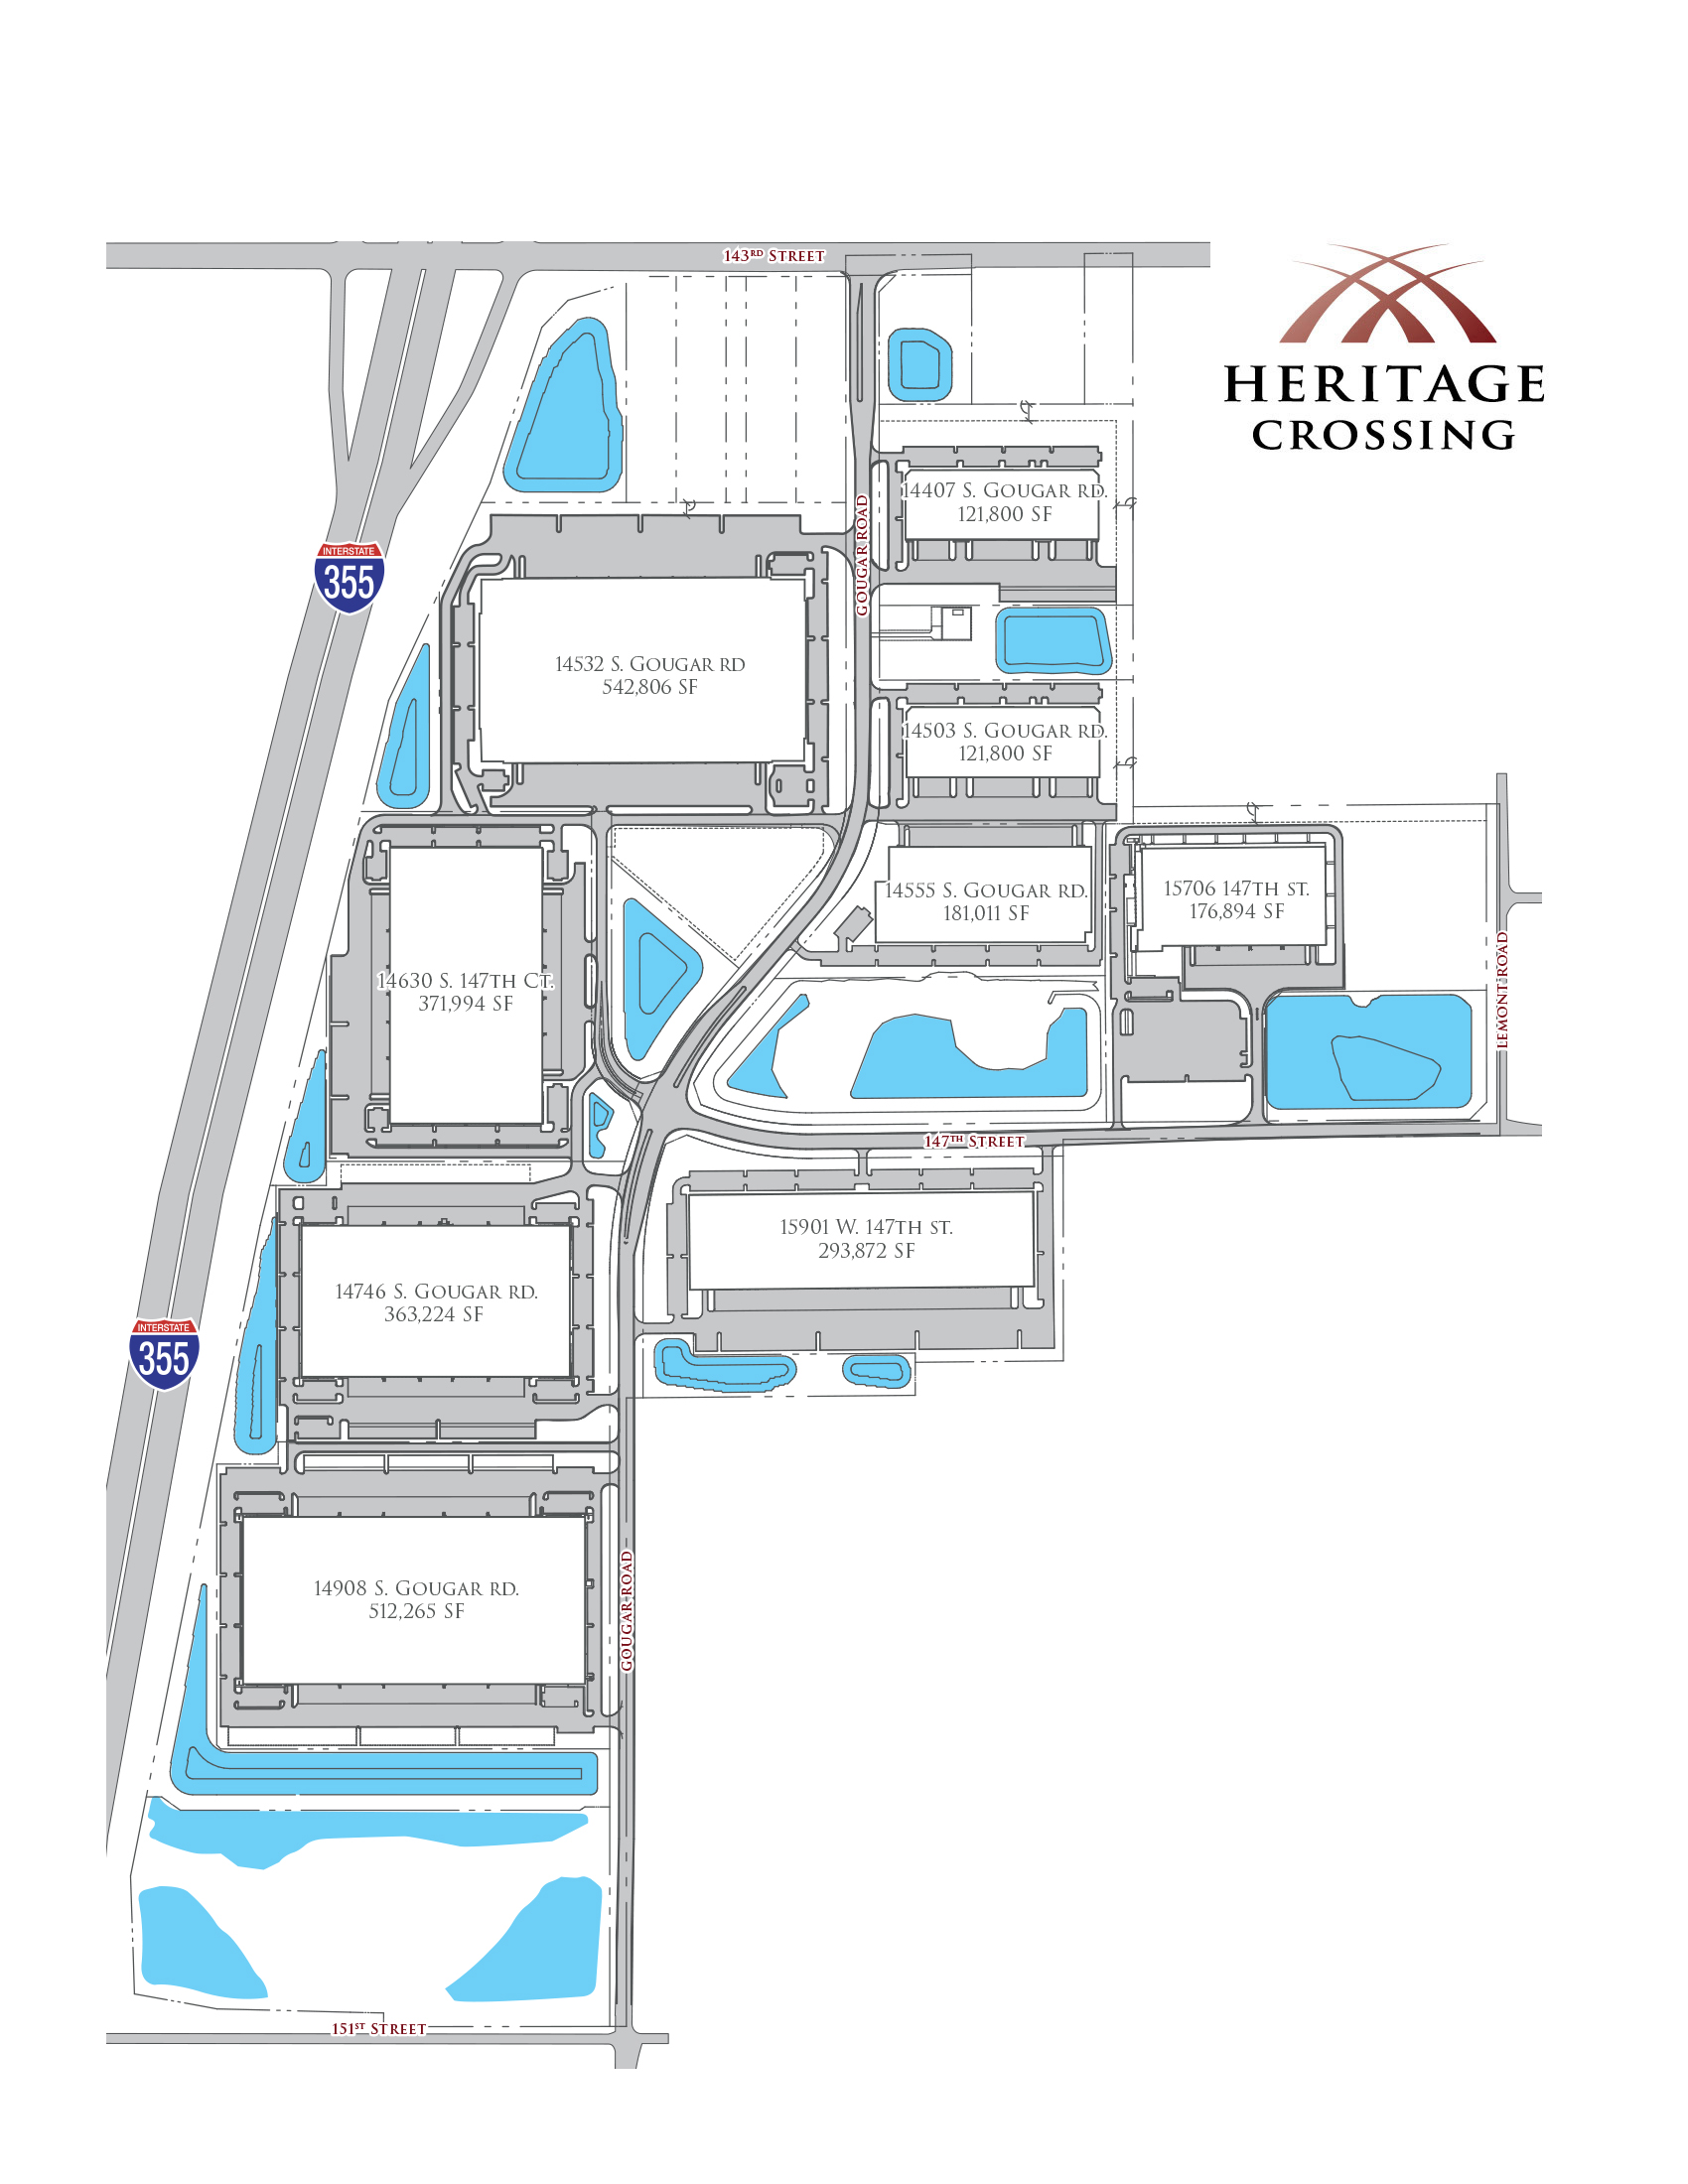 Illustrated master plan of the Heritage Crossing campus